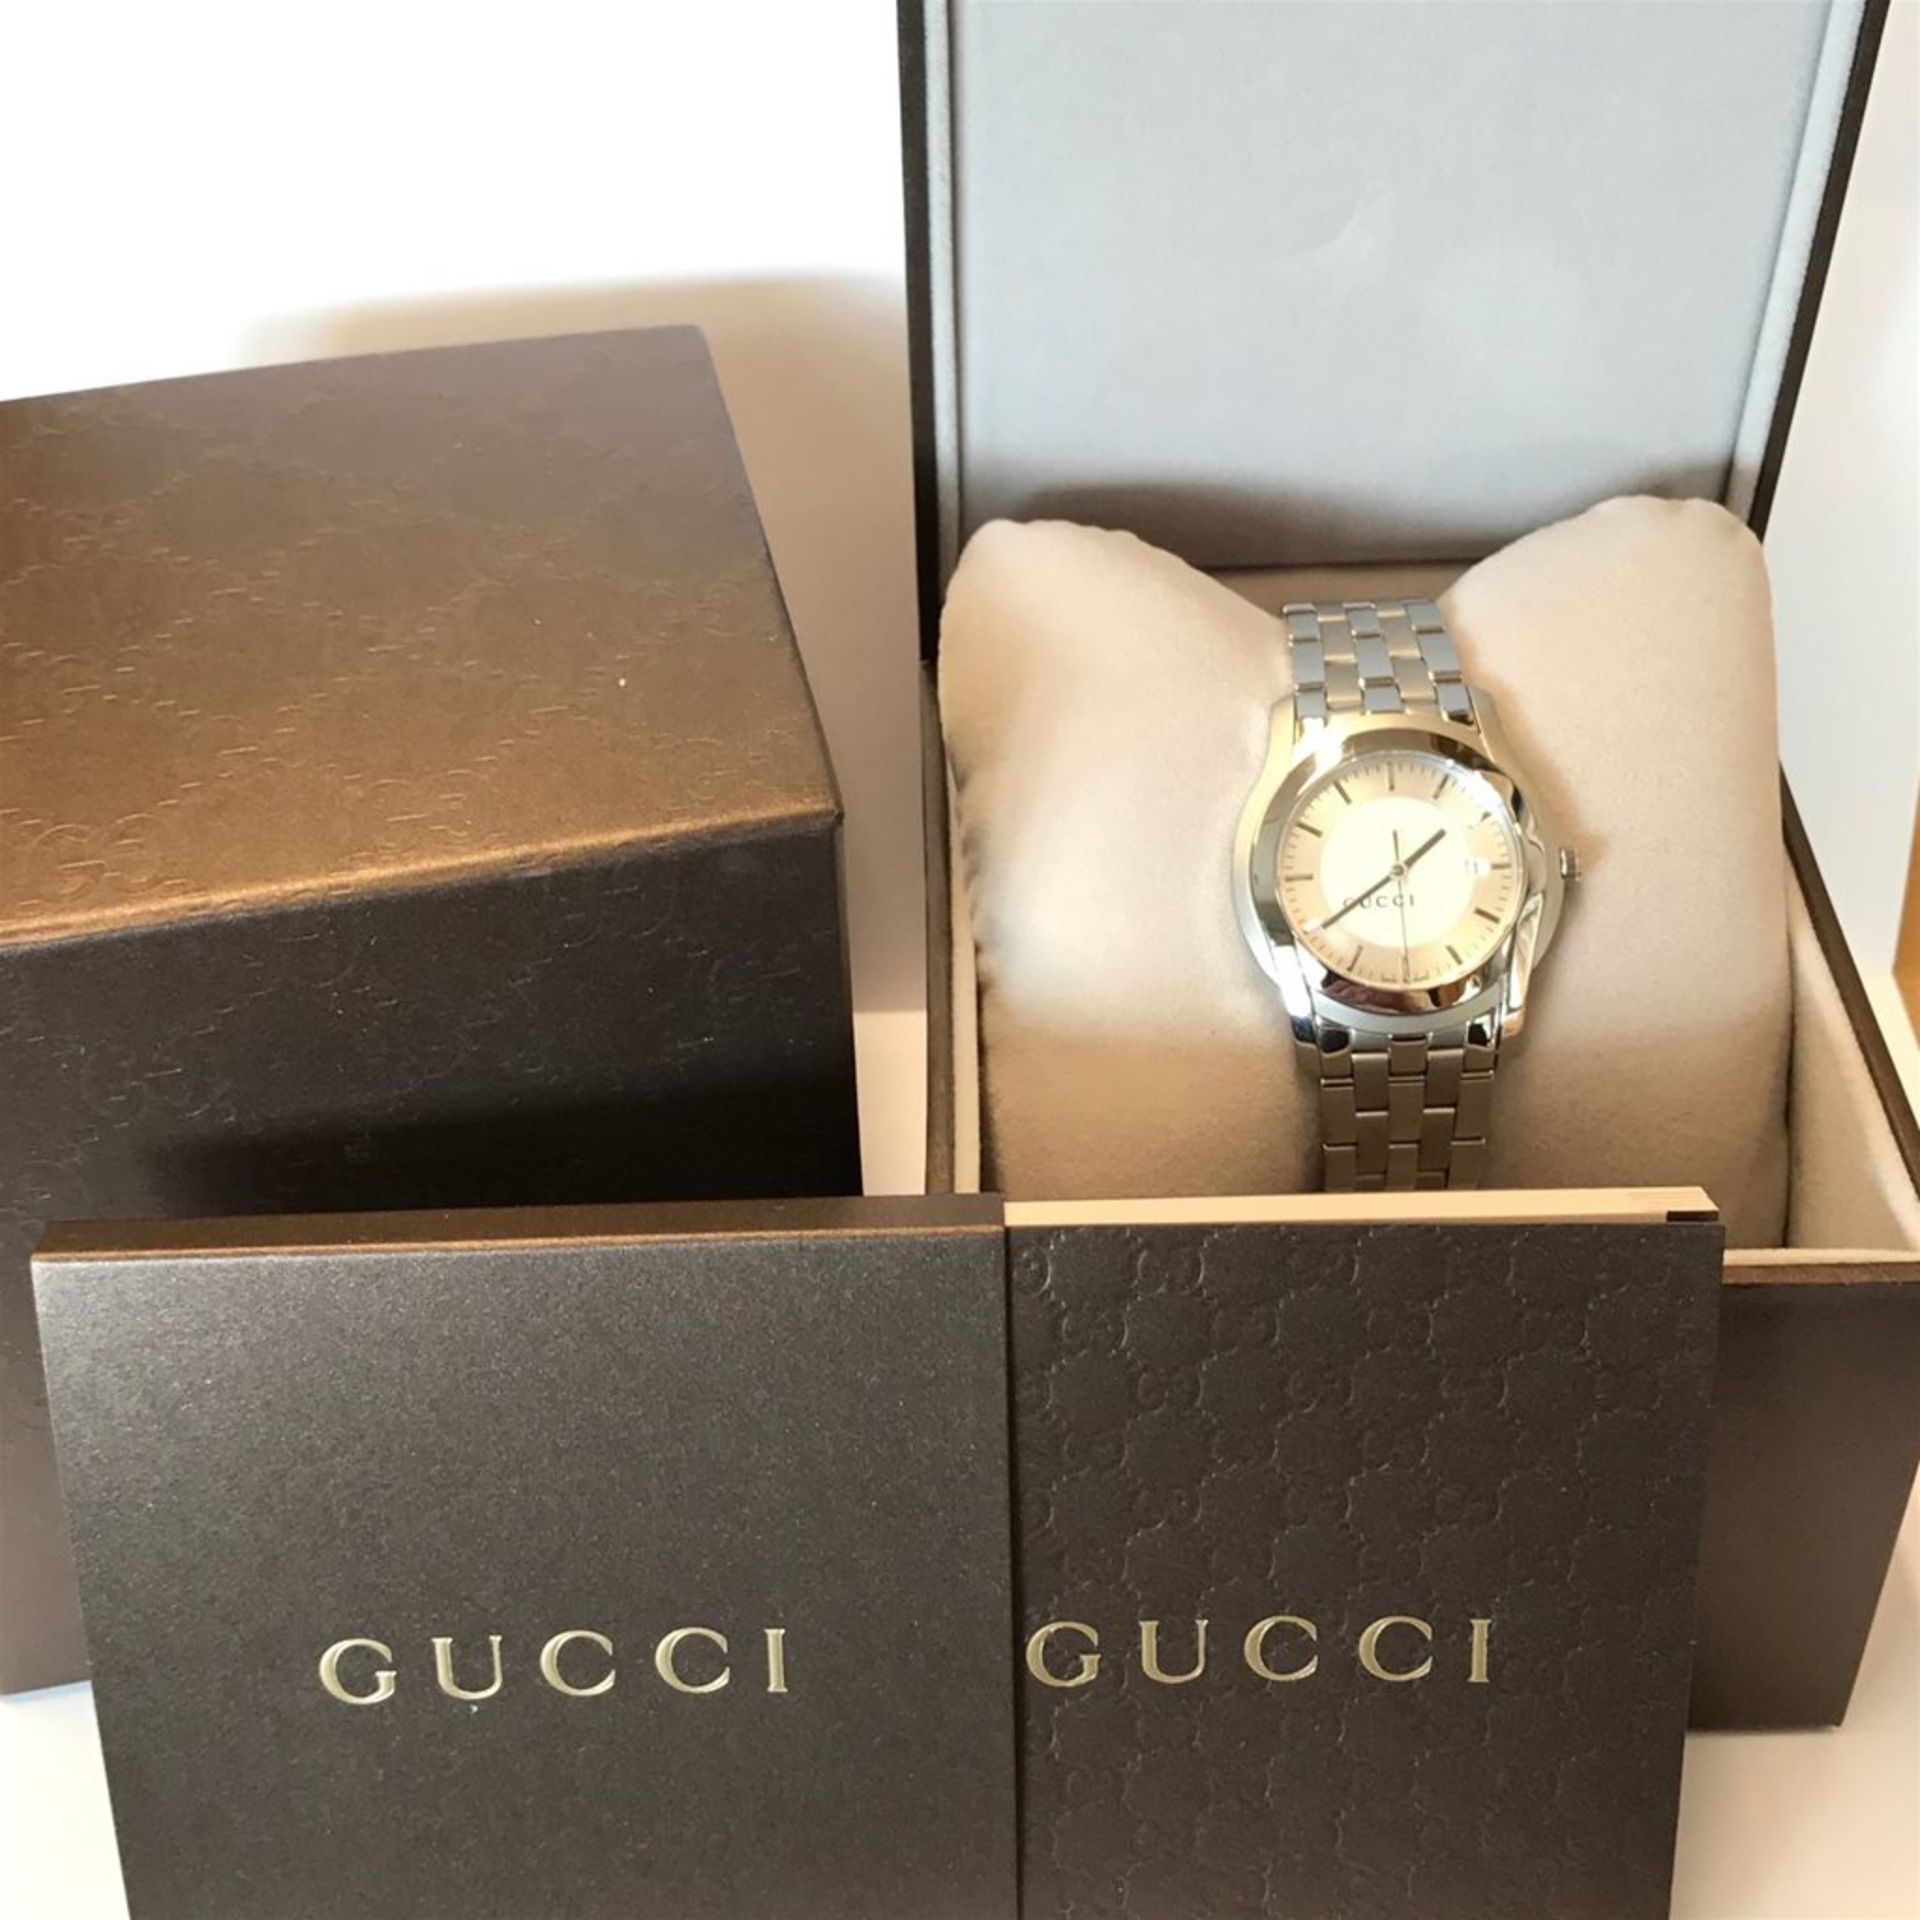 GUCCI G Class Mens Watch - 550XL - 2011 - Box & Papers - 12 Month Warranty - Image 4 of 5